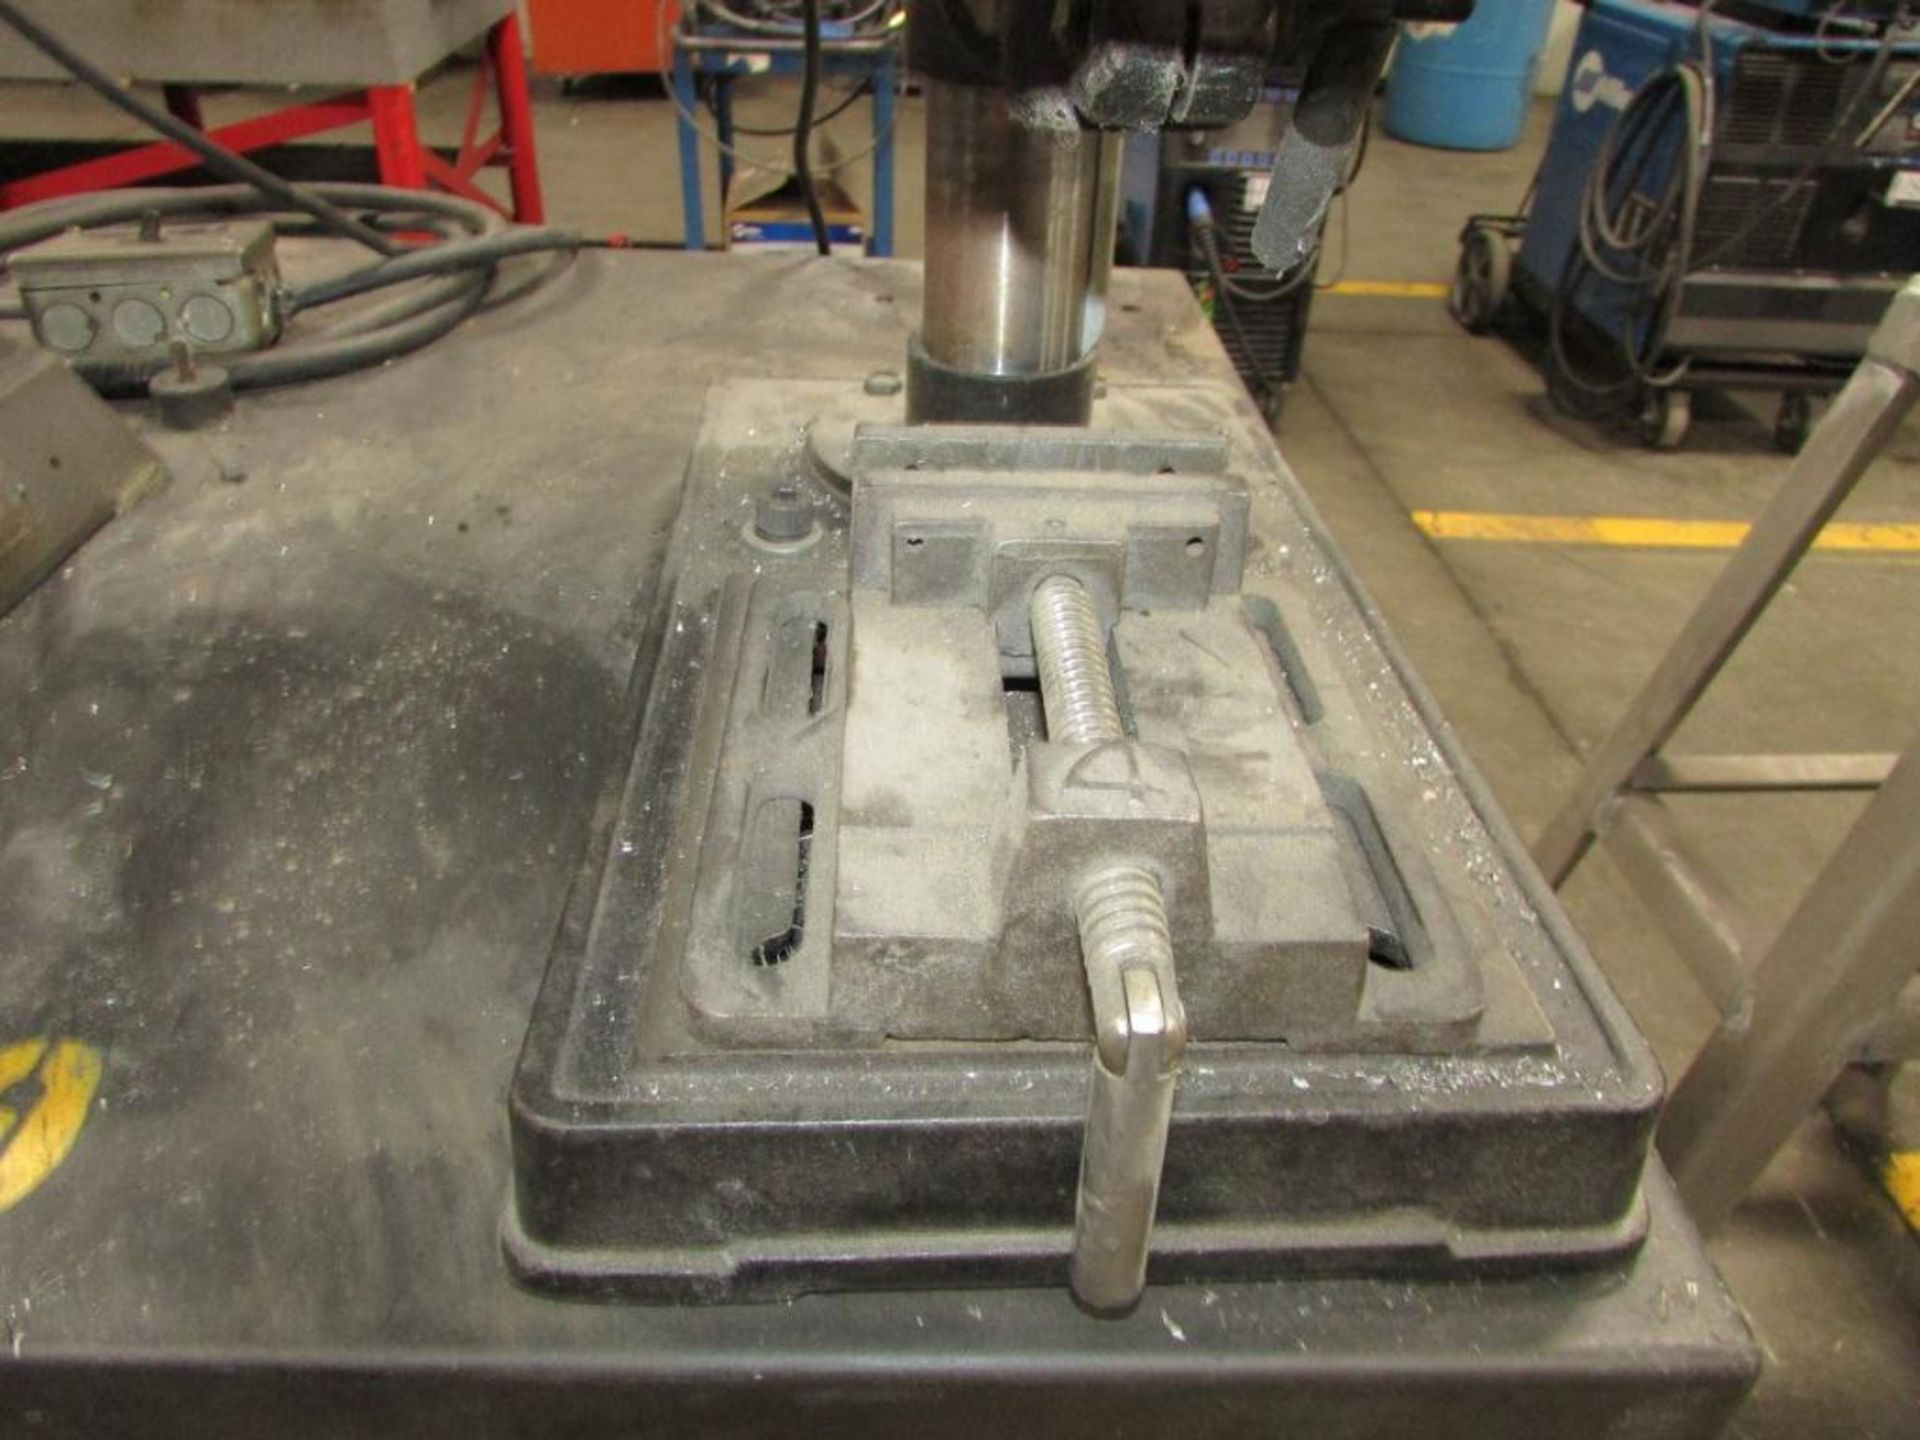 Speedway Series 3514 12" Benchtop Drill Press, 11.5" Diameter Table, 4" Vise, 5/8" Chuck, 2-1/4" Str - Image 5 of 7